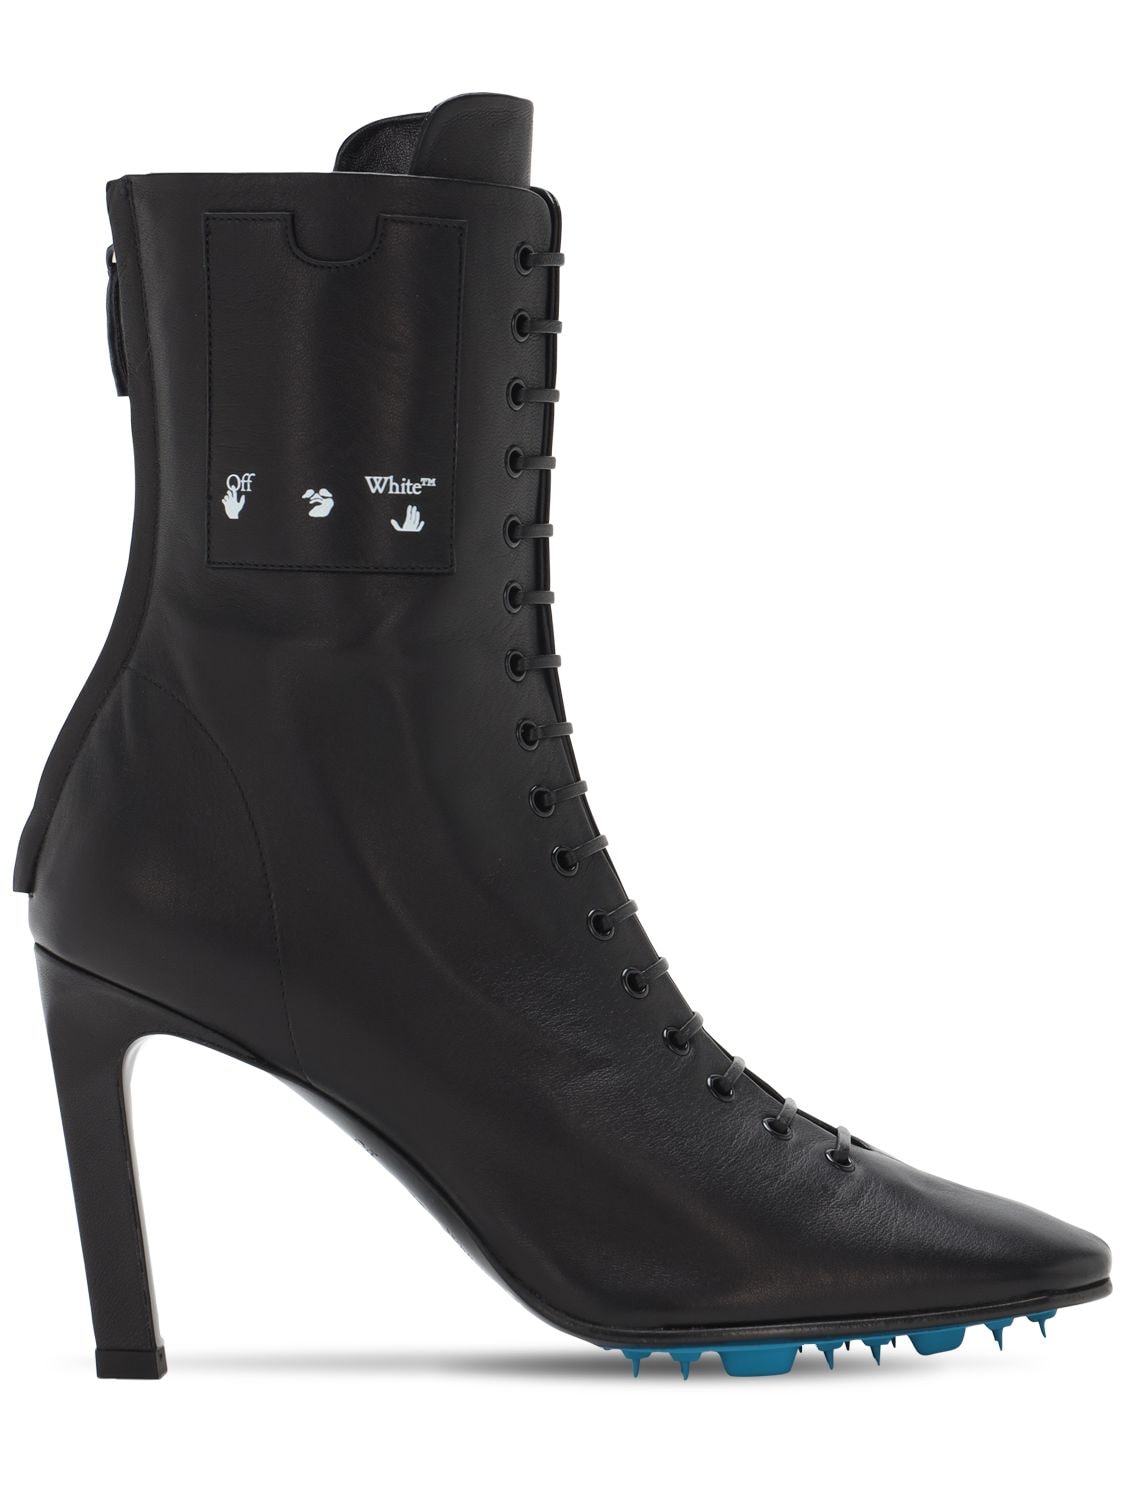 100mm Leather Ankle Boots